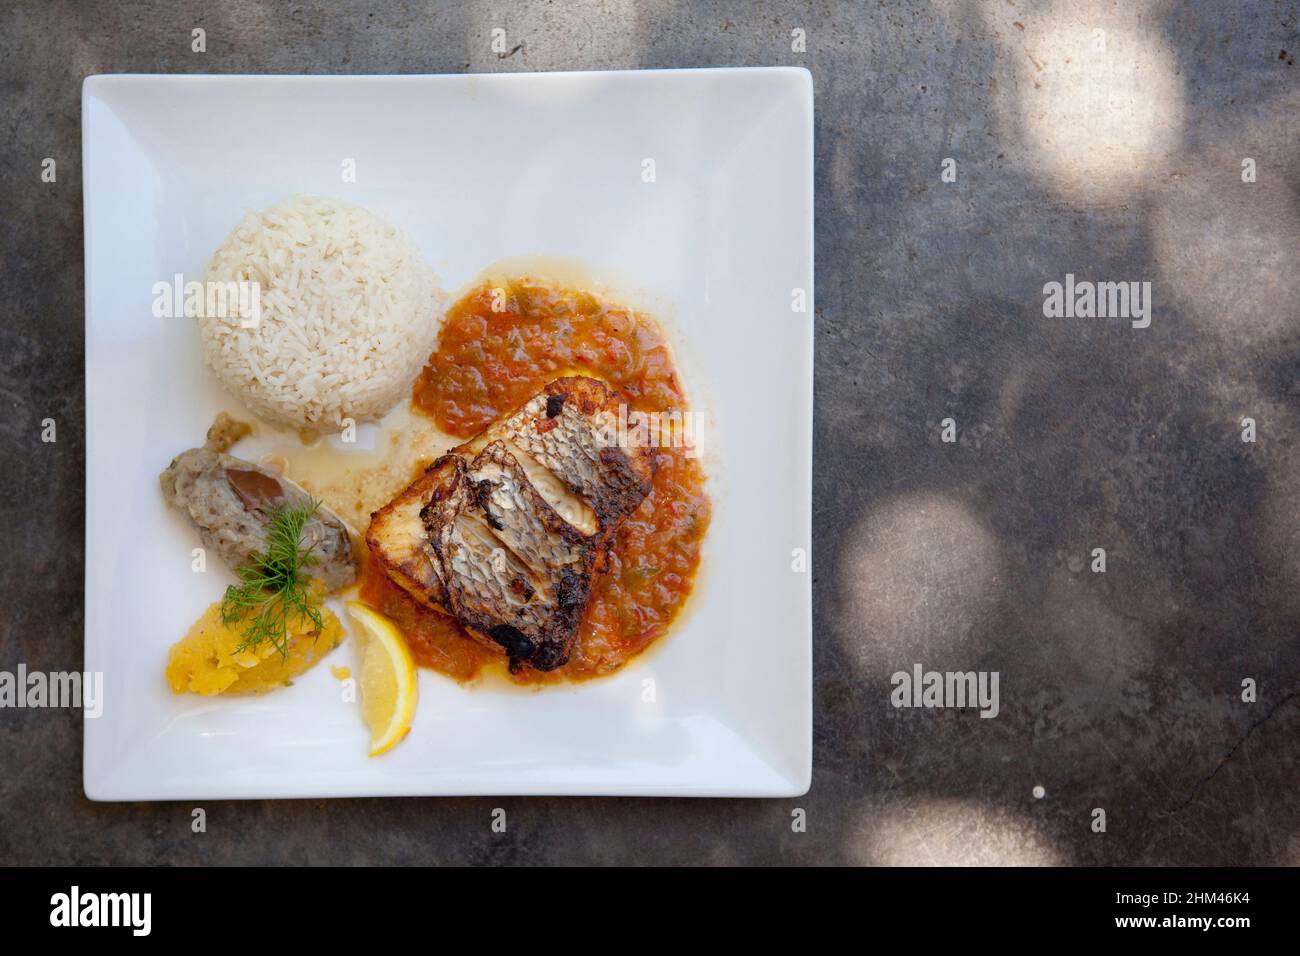 Grilled fish, rice, sauces and lemon on a dinner plate. Stock Photo